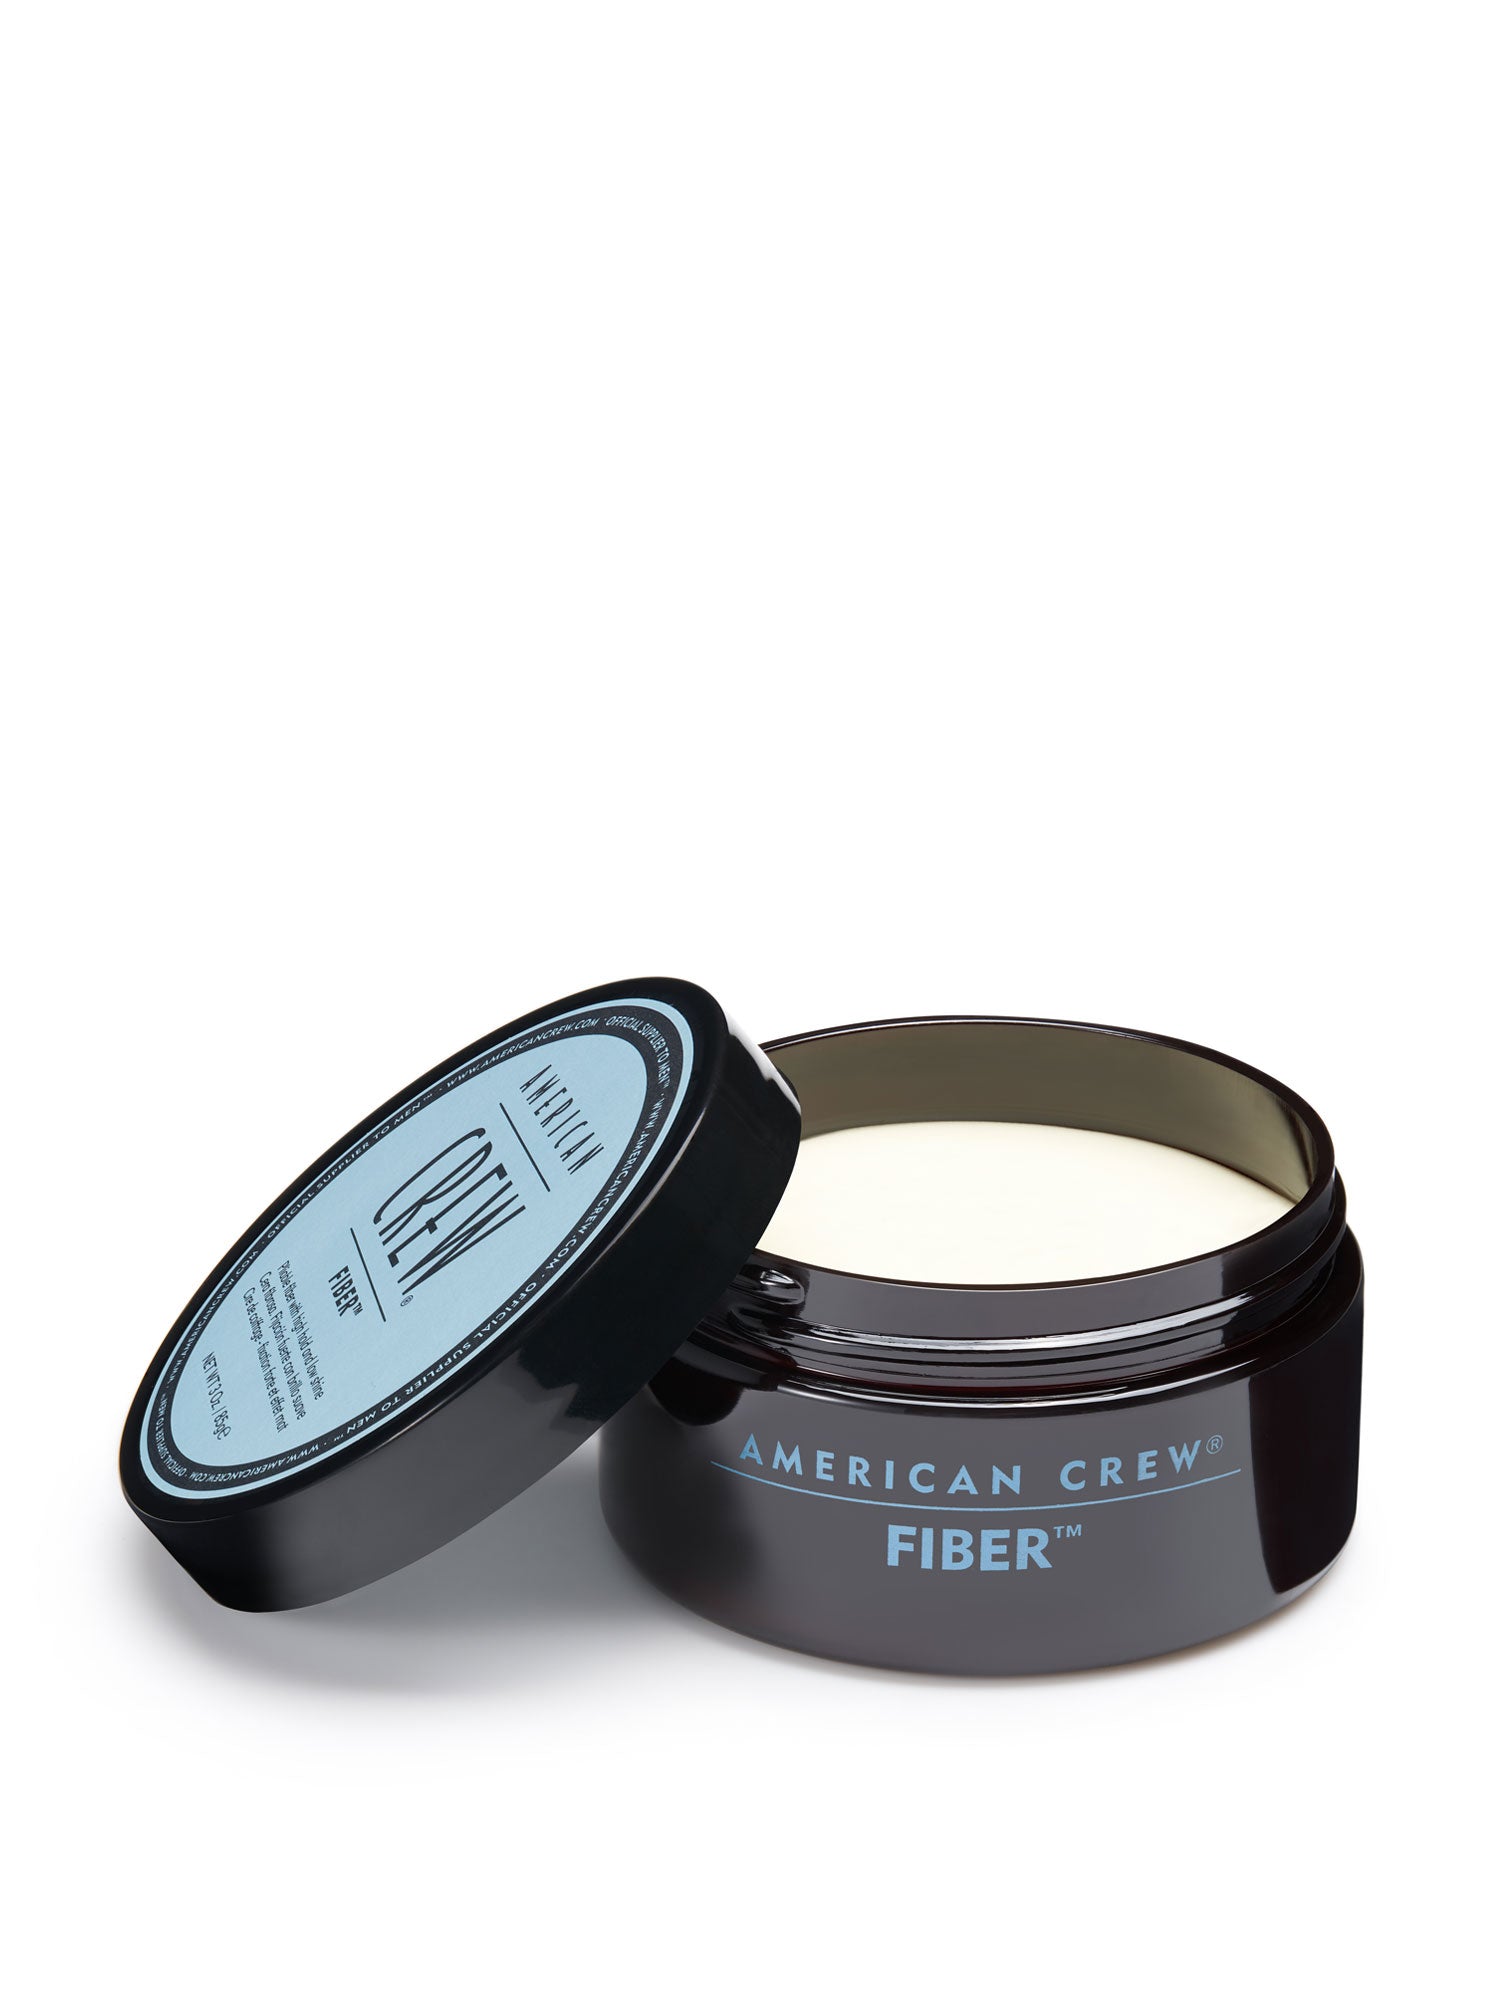 Fix Your Lid, Grooming, Fix Your Lid Styling Fiber Forming Cream